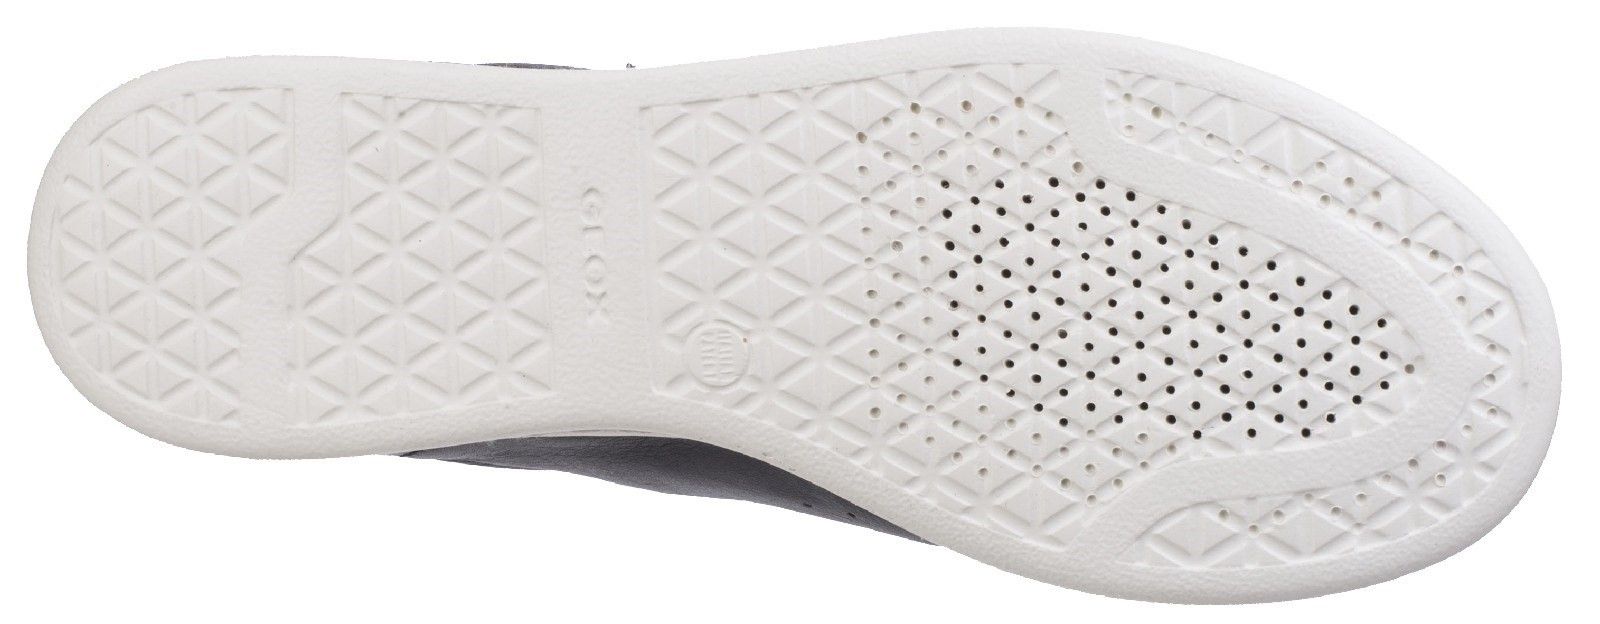 The classic Geox rubber sole is based on an exclusive patent: the combination of the perforated sole and the resistant breathable waterproof membrane allow for natural temperature regulation, thereby keeps feet dry and comfortable for the whole day.Light & Flexy. 
Evergreen. 
Anti-Slip Outsole. 
Full Leather Upper.